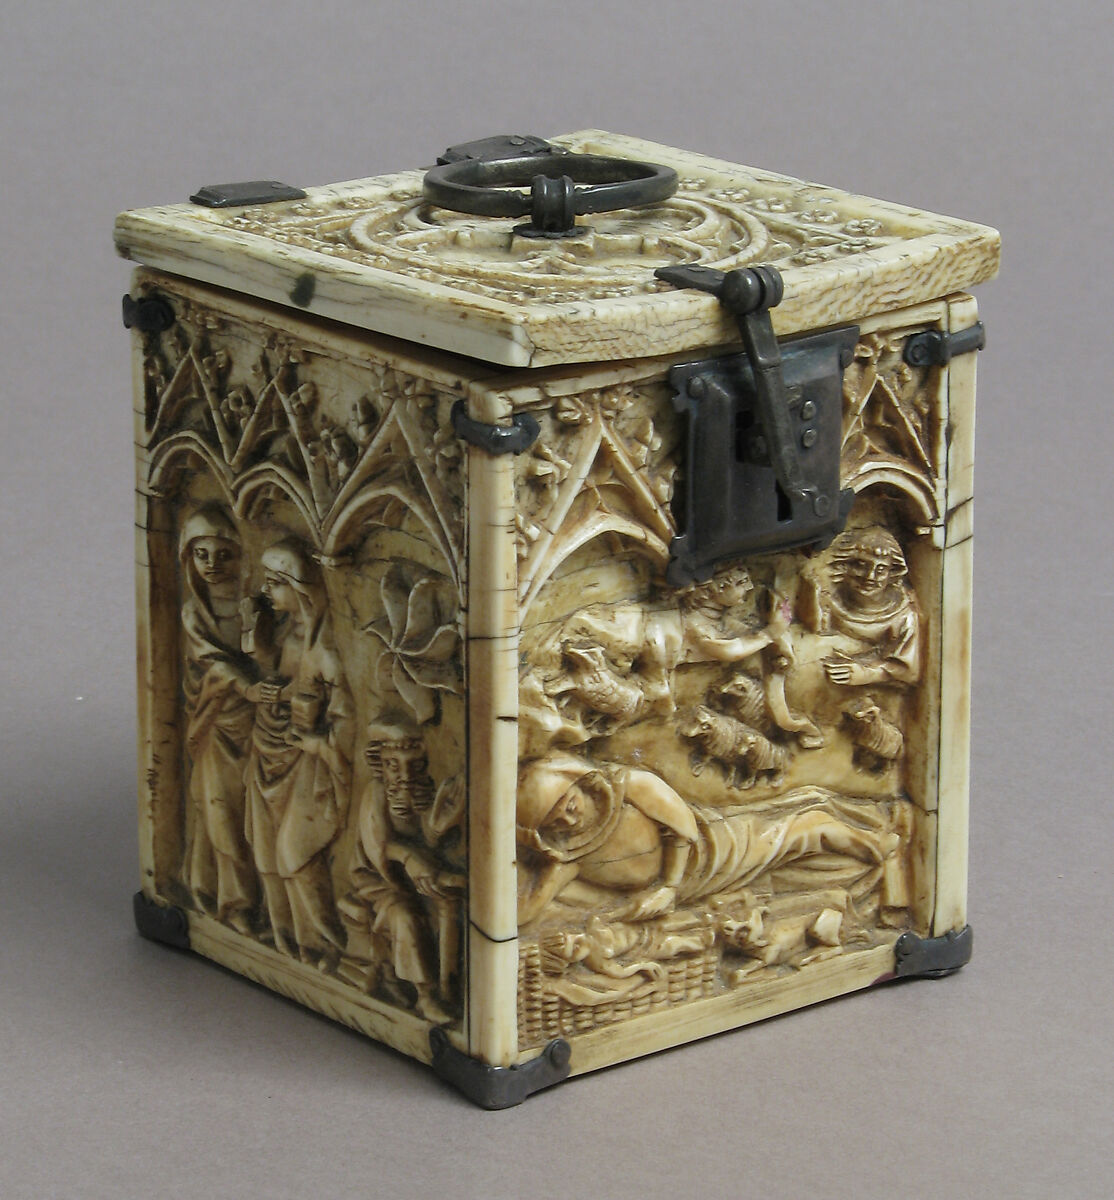 Box with Scenes from the Infancy of Christ, Ivory, metal (silver?) mounts, European (French style) 